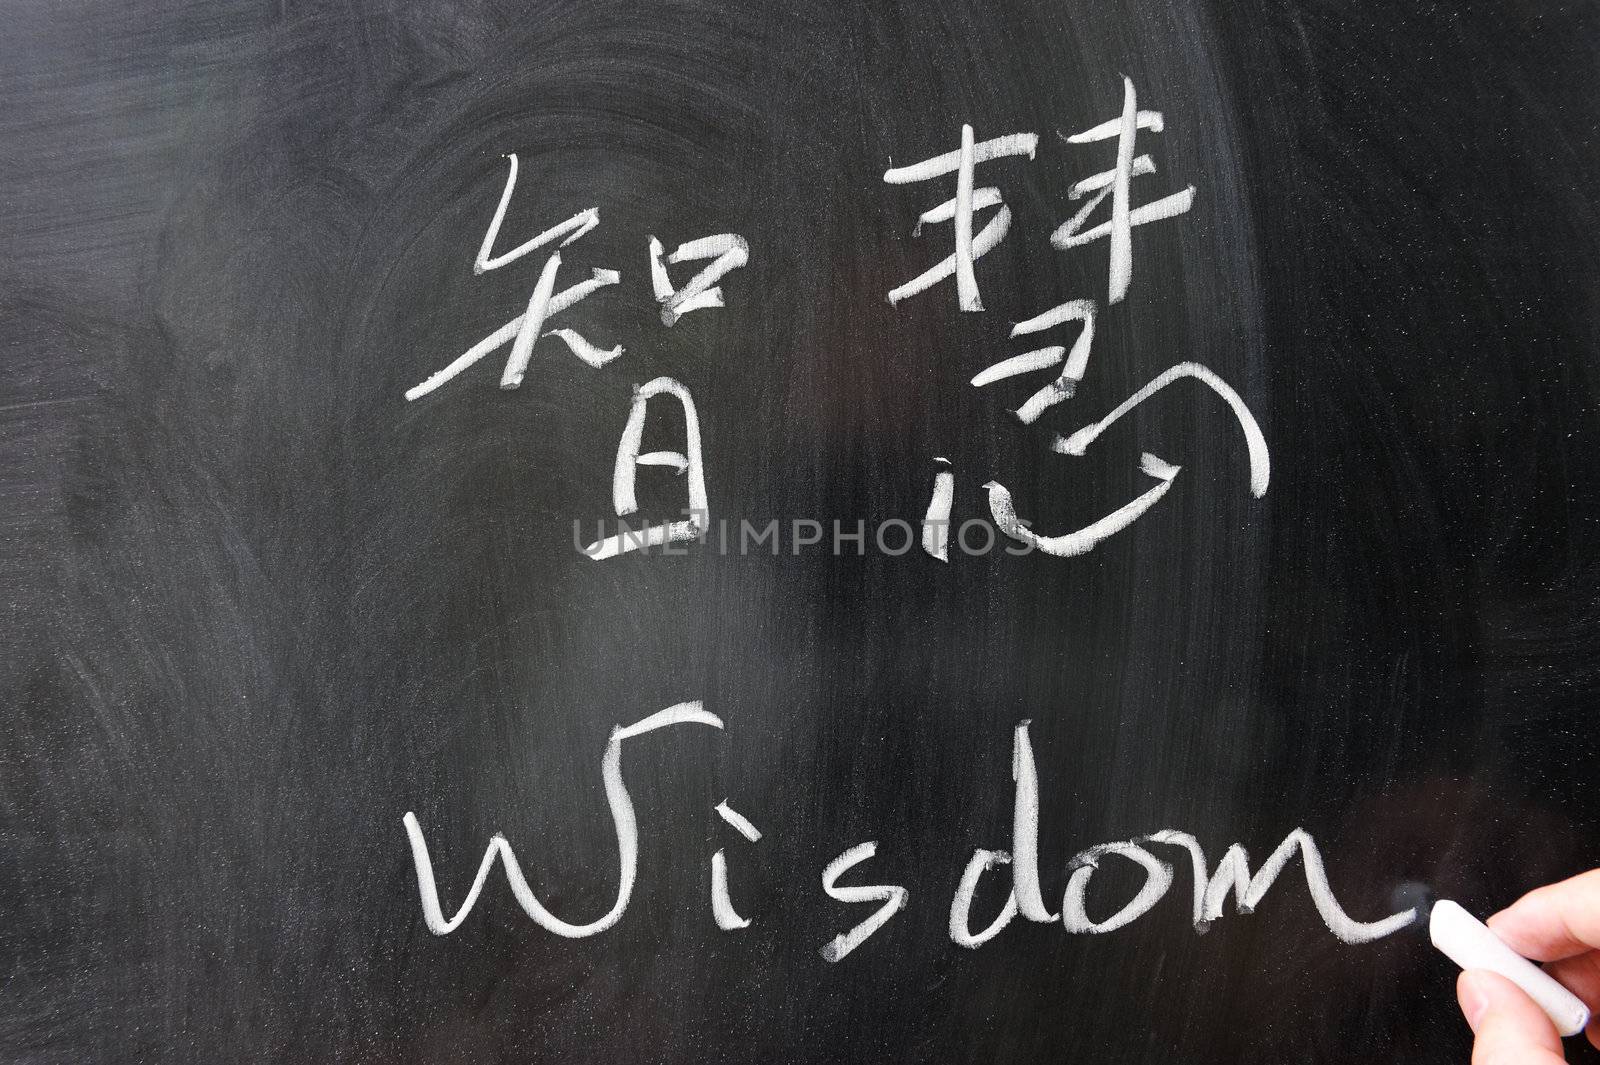 Wisdom word in Chinese and English written on the chalkboard